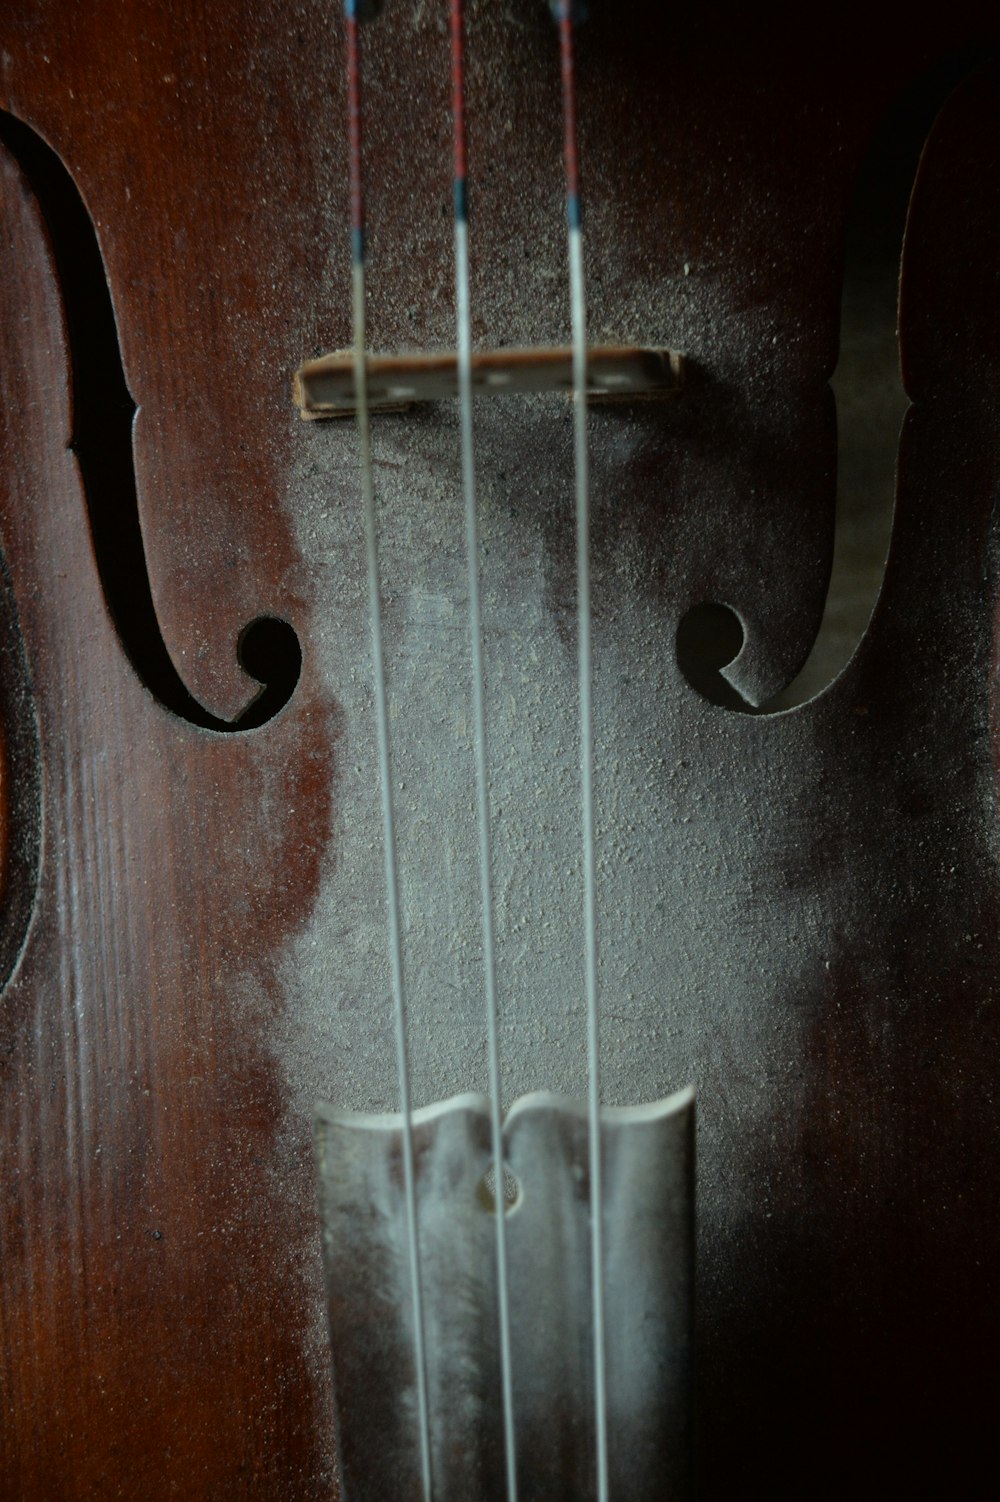 a close up of the strings of a violin